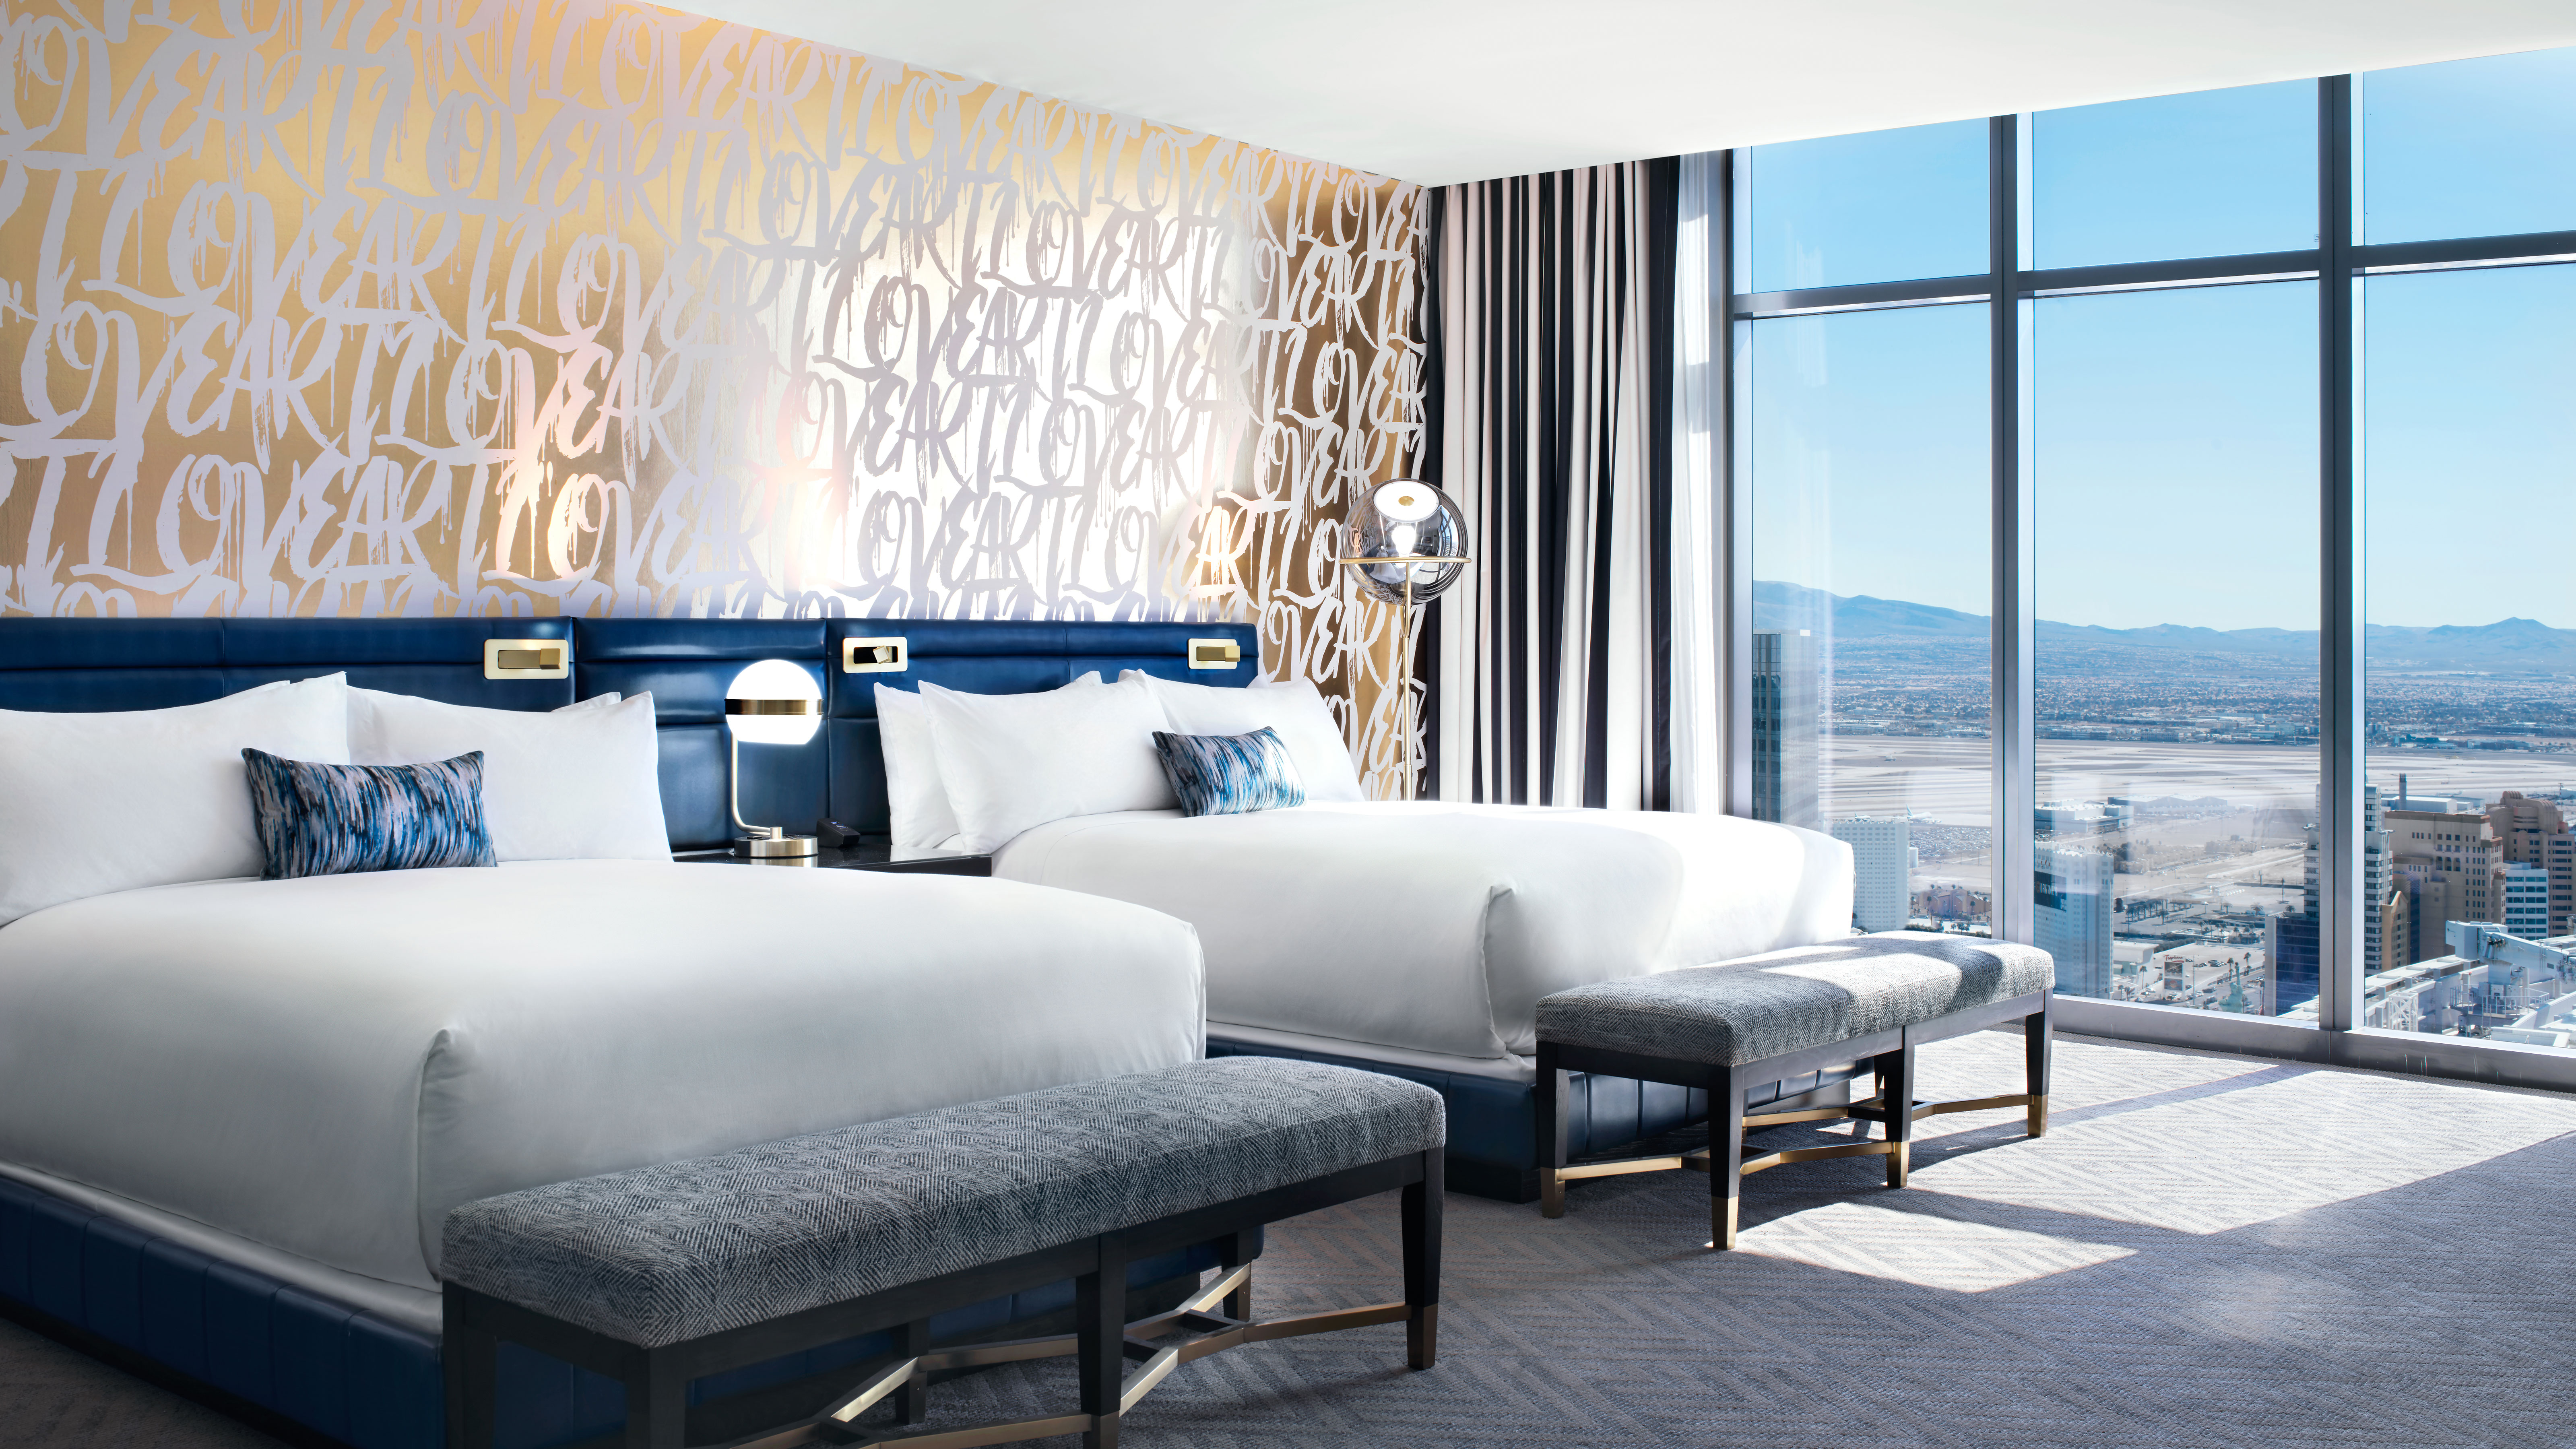 Las Vegas Luxury Hotel Rooms and Suites The Cosmopolitan Nude Pic Hq